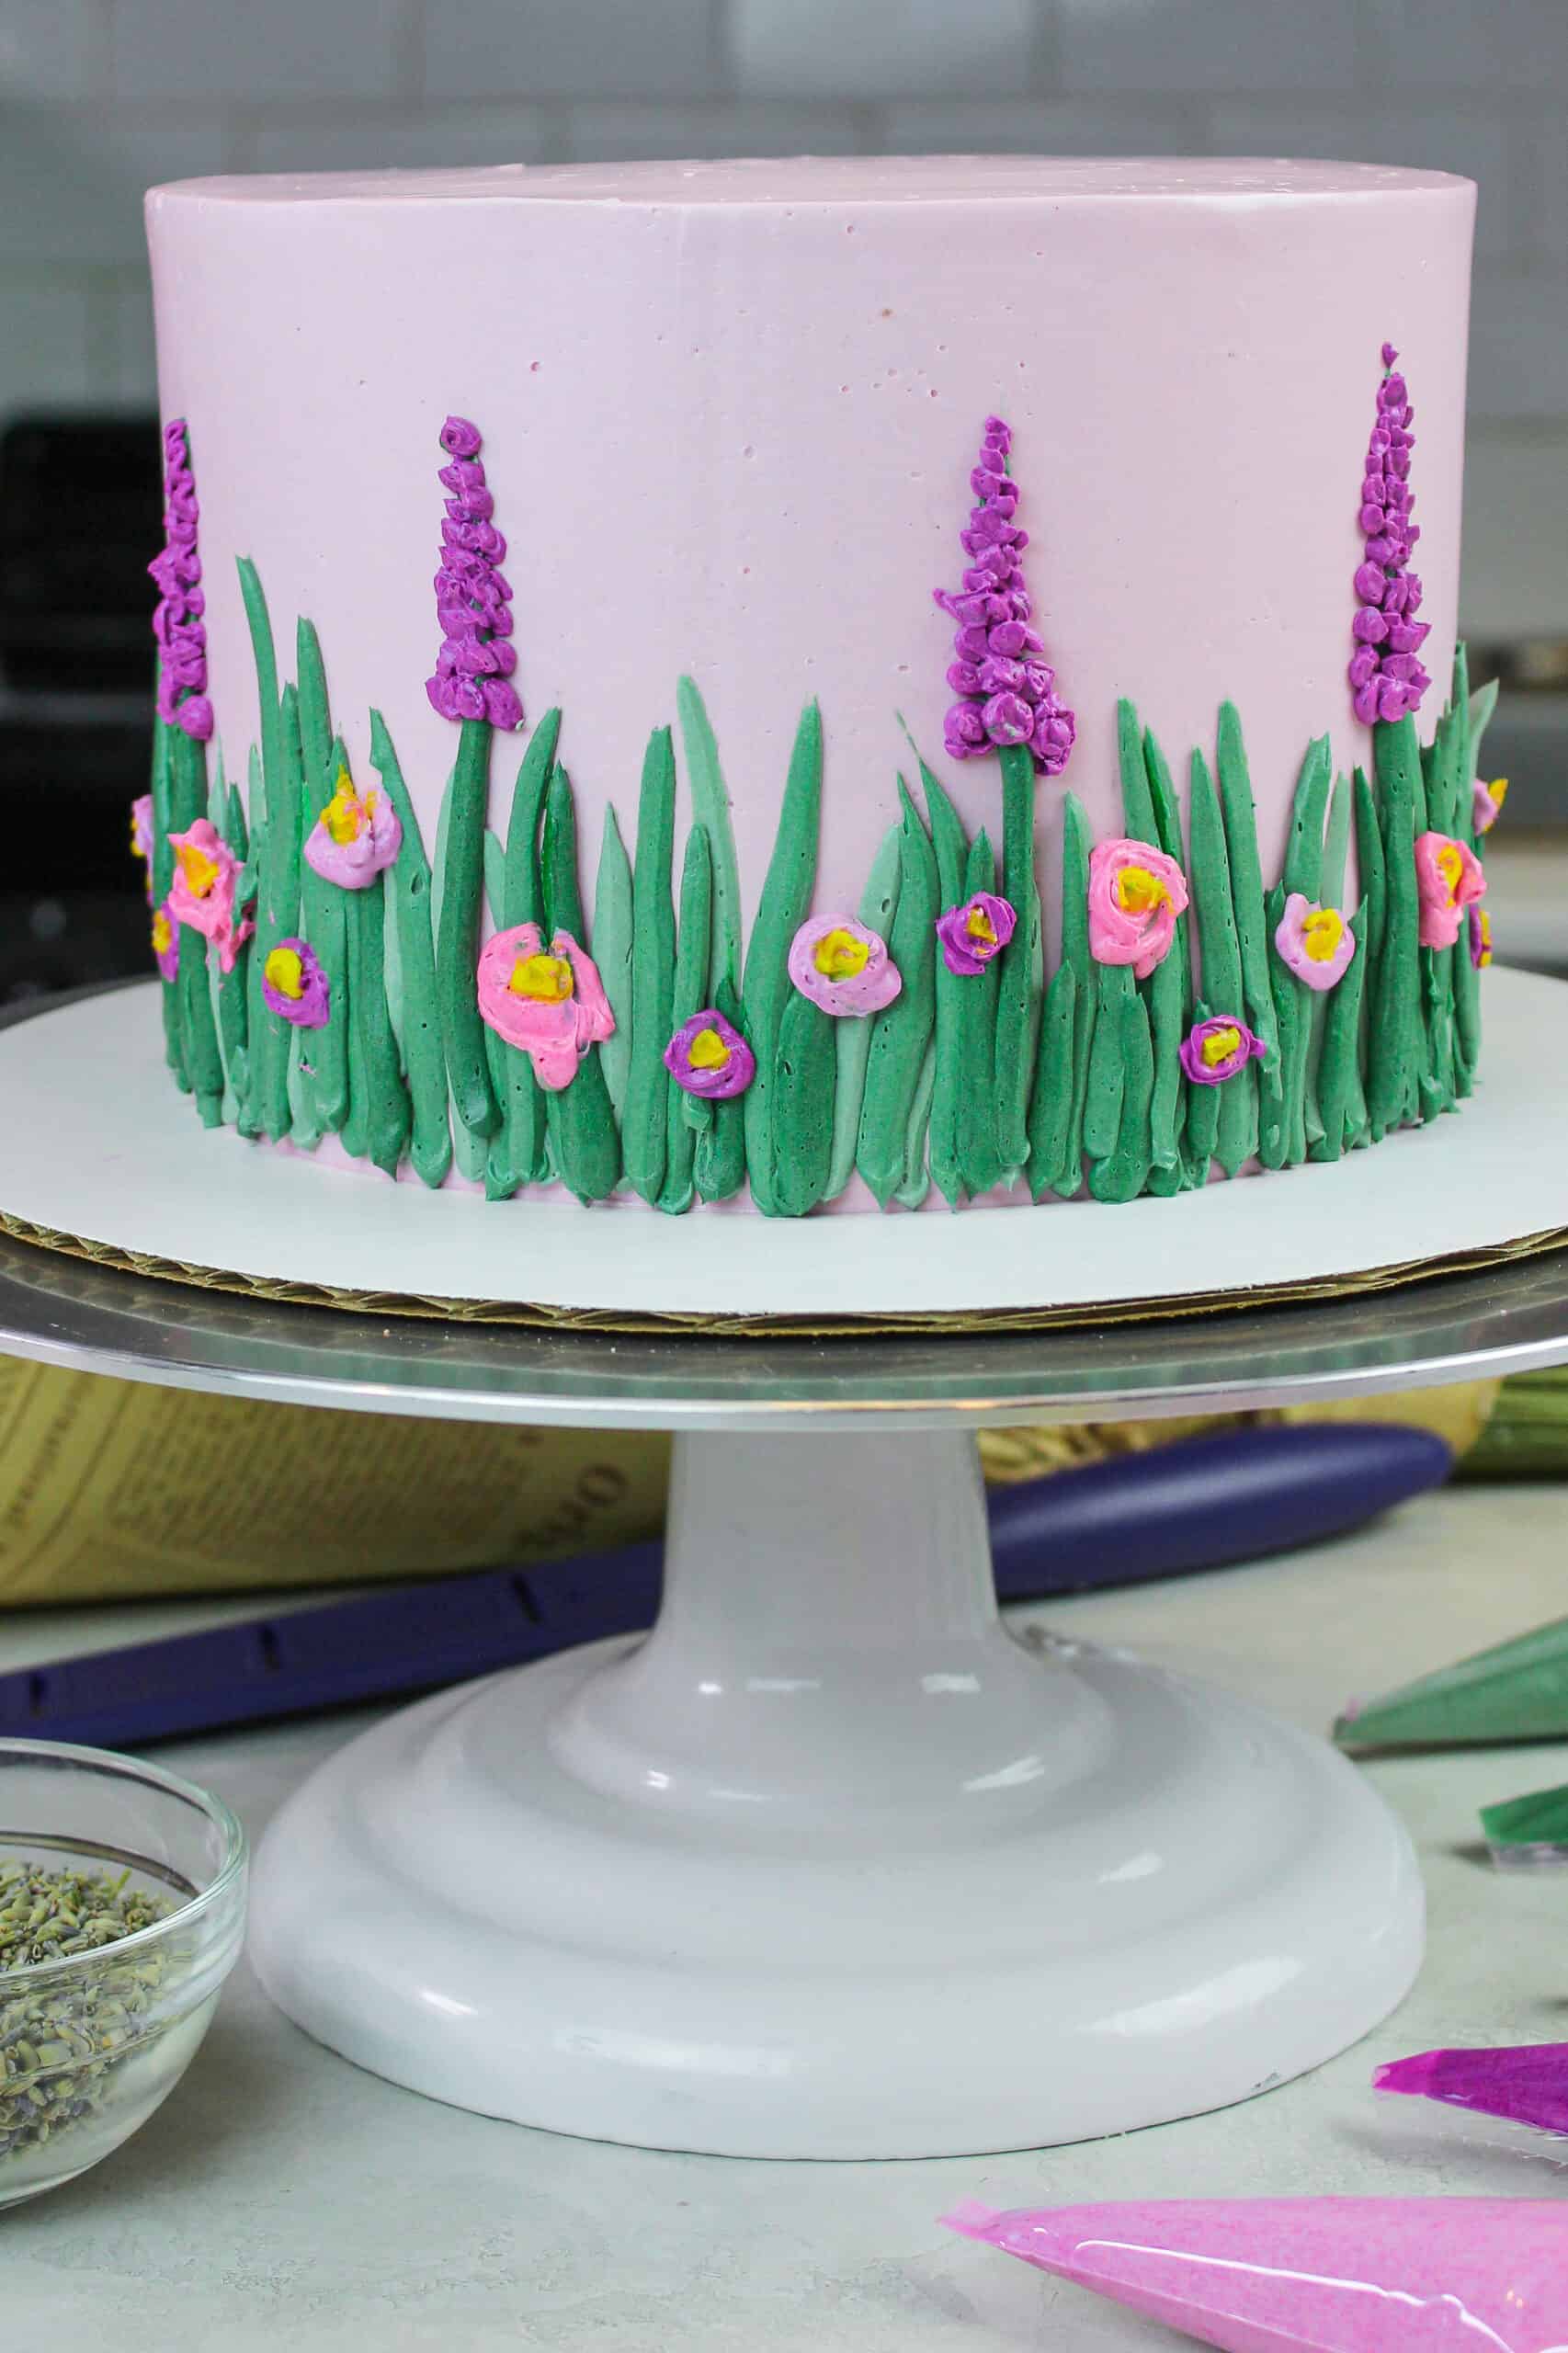 49 Cute Cake Ideas For Your Next Celebration : Lavender Cake | Unique  birthday cakes, Candy birthday cakes, Crazy cakes